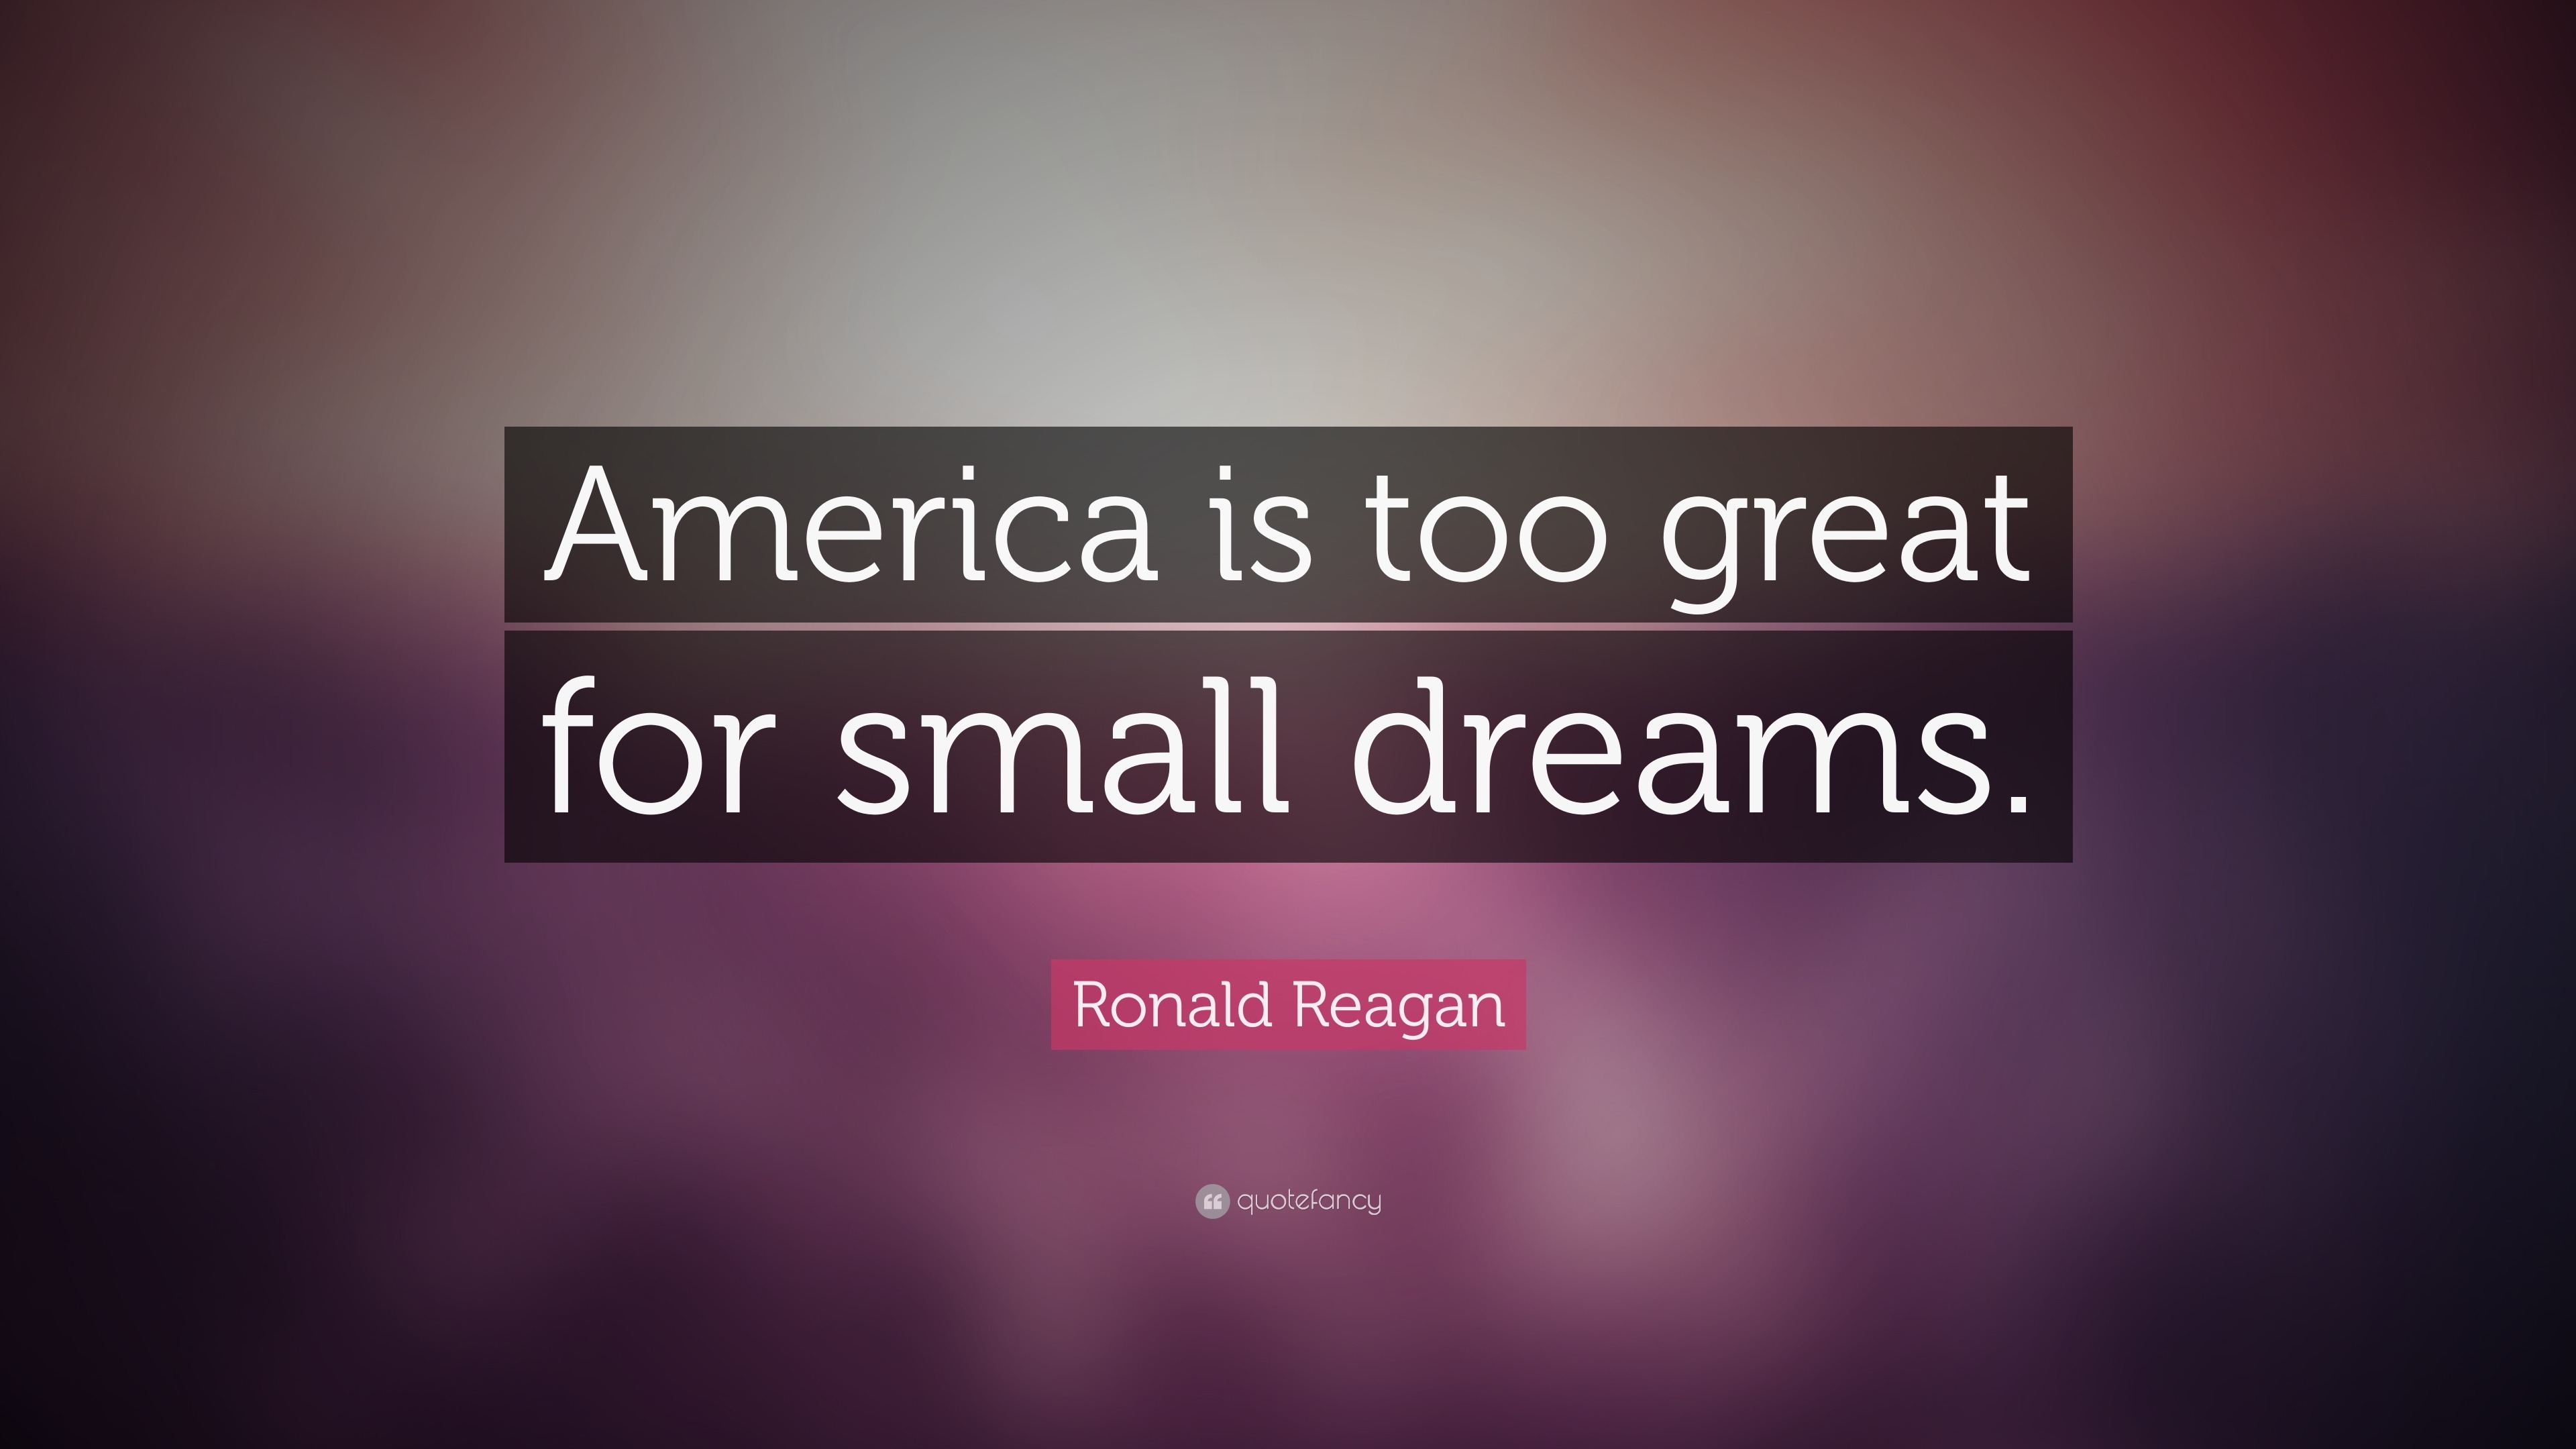 Ronald Reagan Quote: “America is too great for small dreams.”